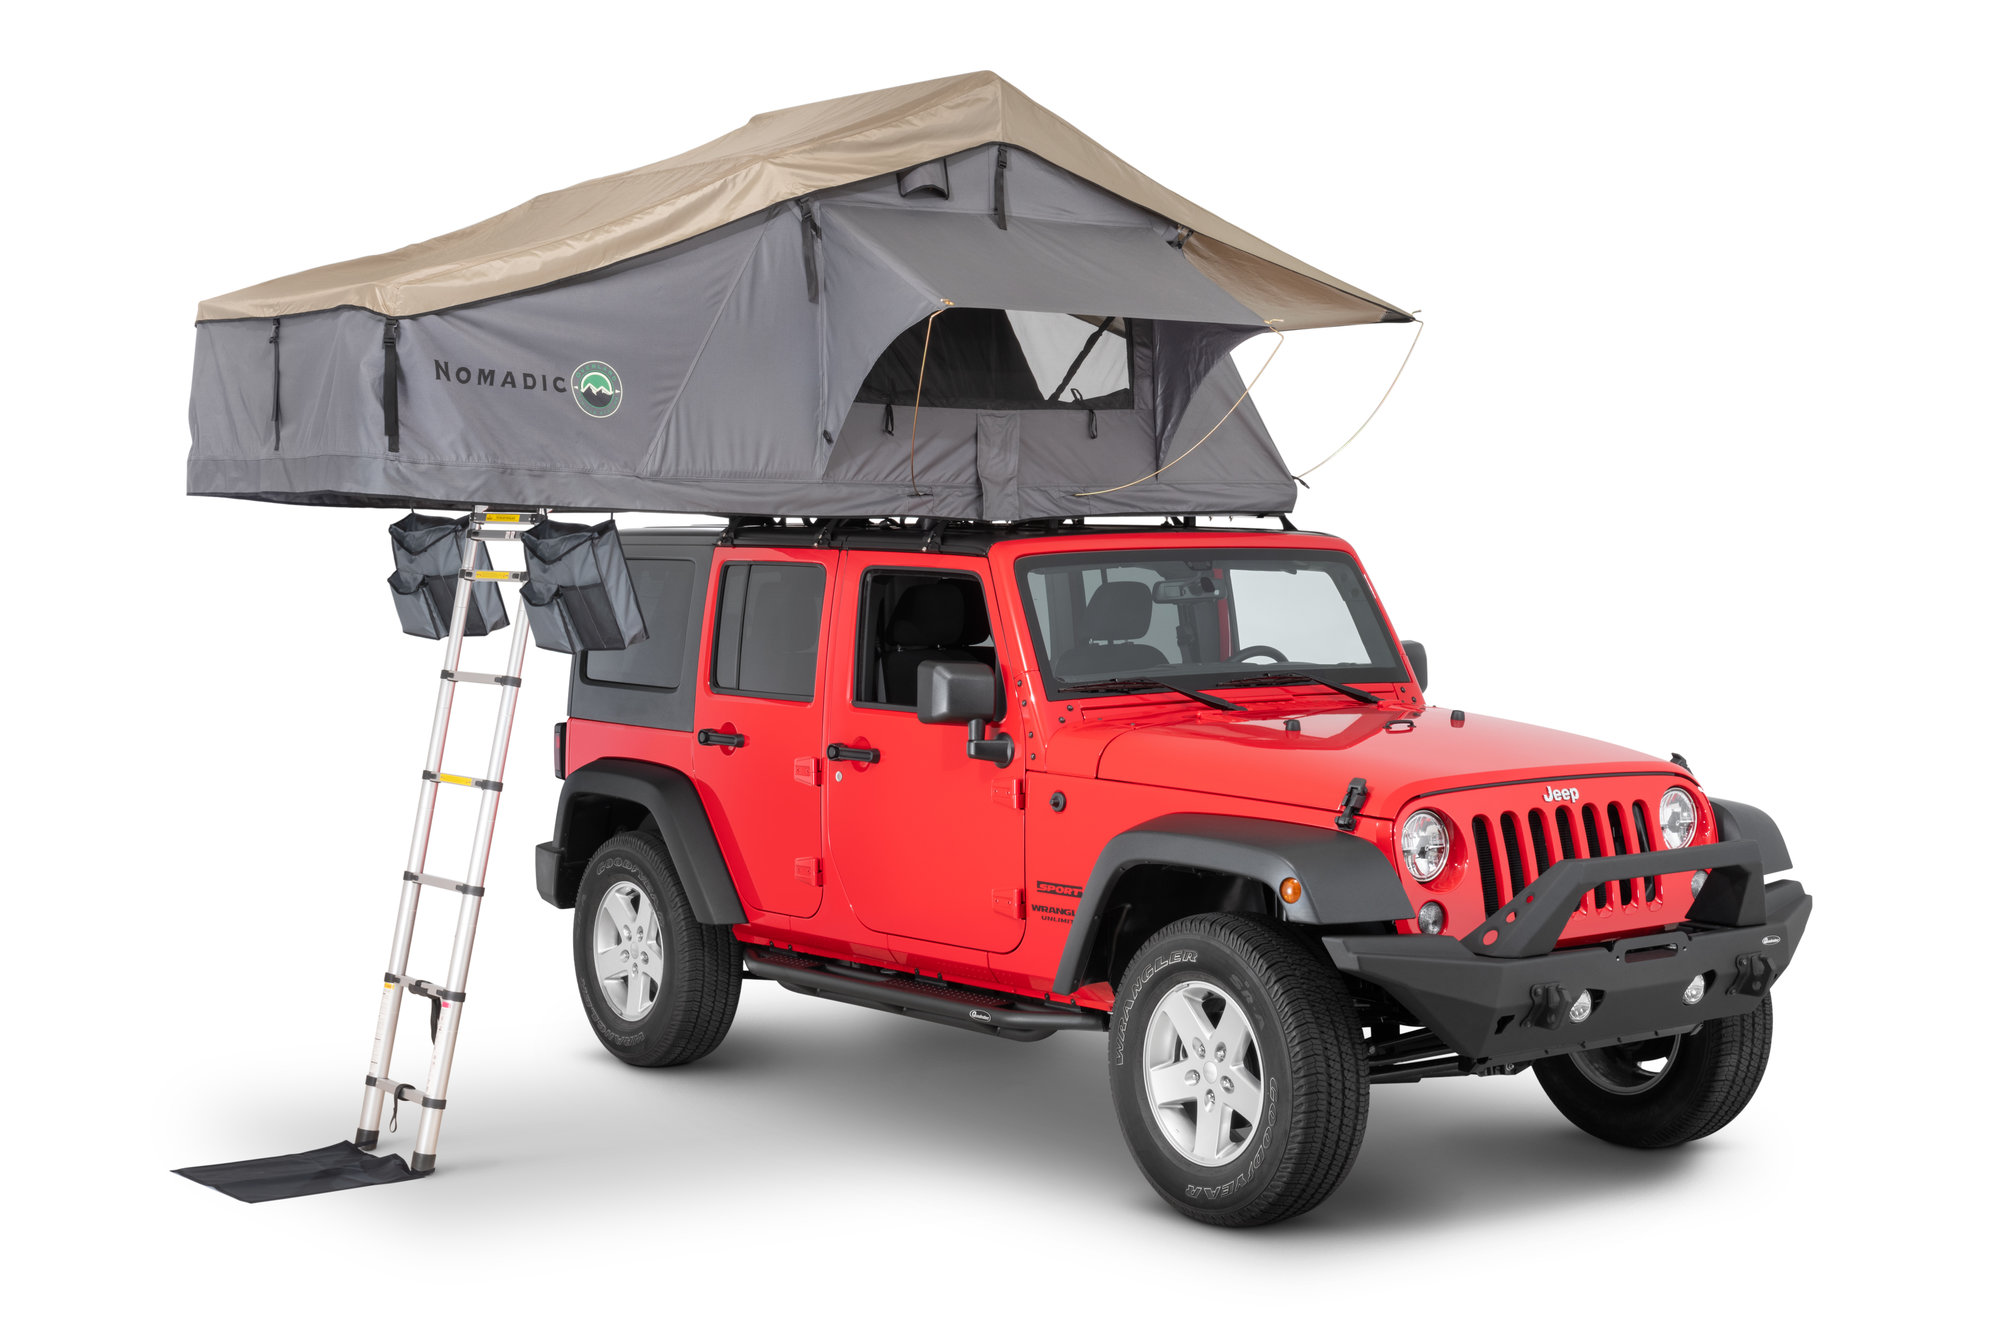 https://www.quadratec.com/sites/default/files/styles/product_zoomed/public/product_images/OVS-nomadic-2-roof-top-tent-studio-installed-full-kit.jpg